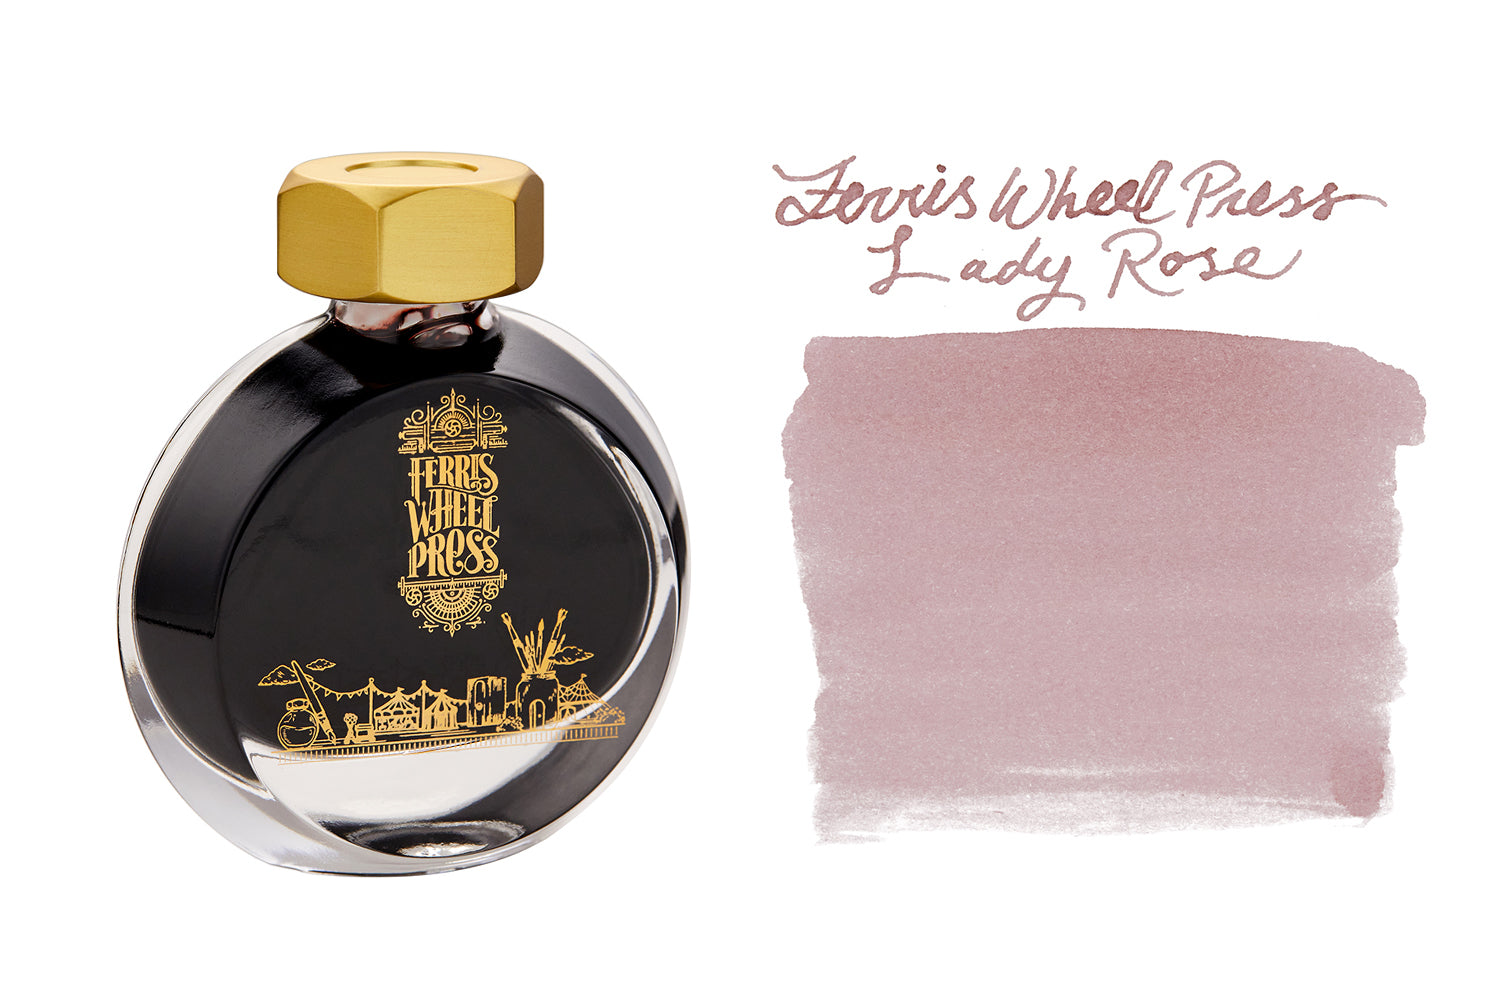 Experience the Joy of Writing with Ferris Wheel Press Fountain Pen Inks